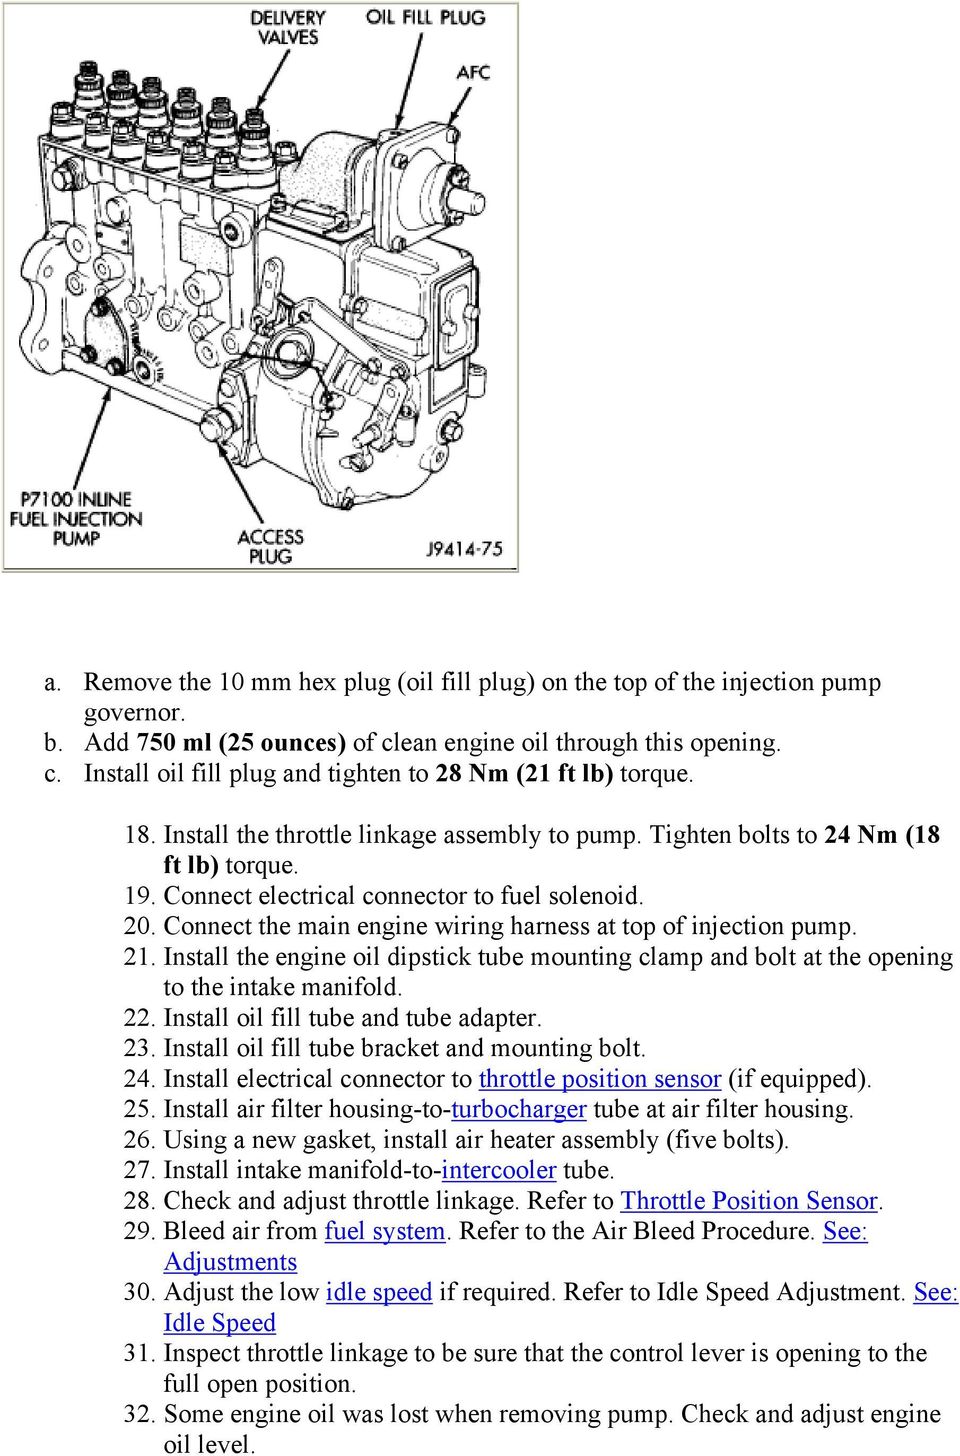 Connect the main engine wiring harness at top of injection pump. 21. Install the engine oil dipstick tube mounting clamp and bolt at the opening to the intake manifold. 22.